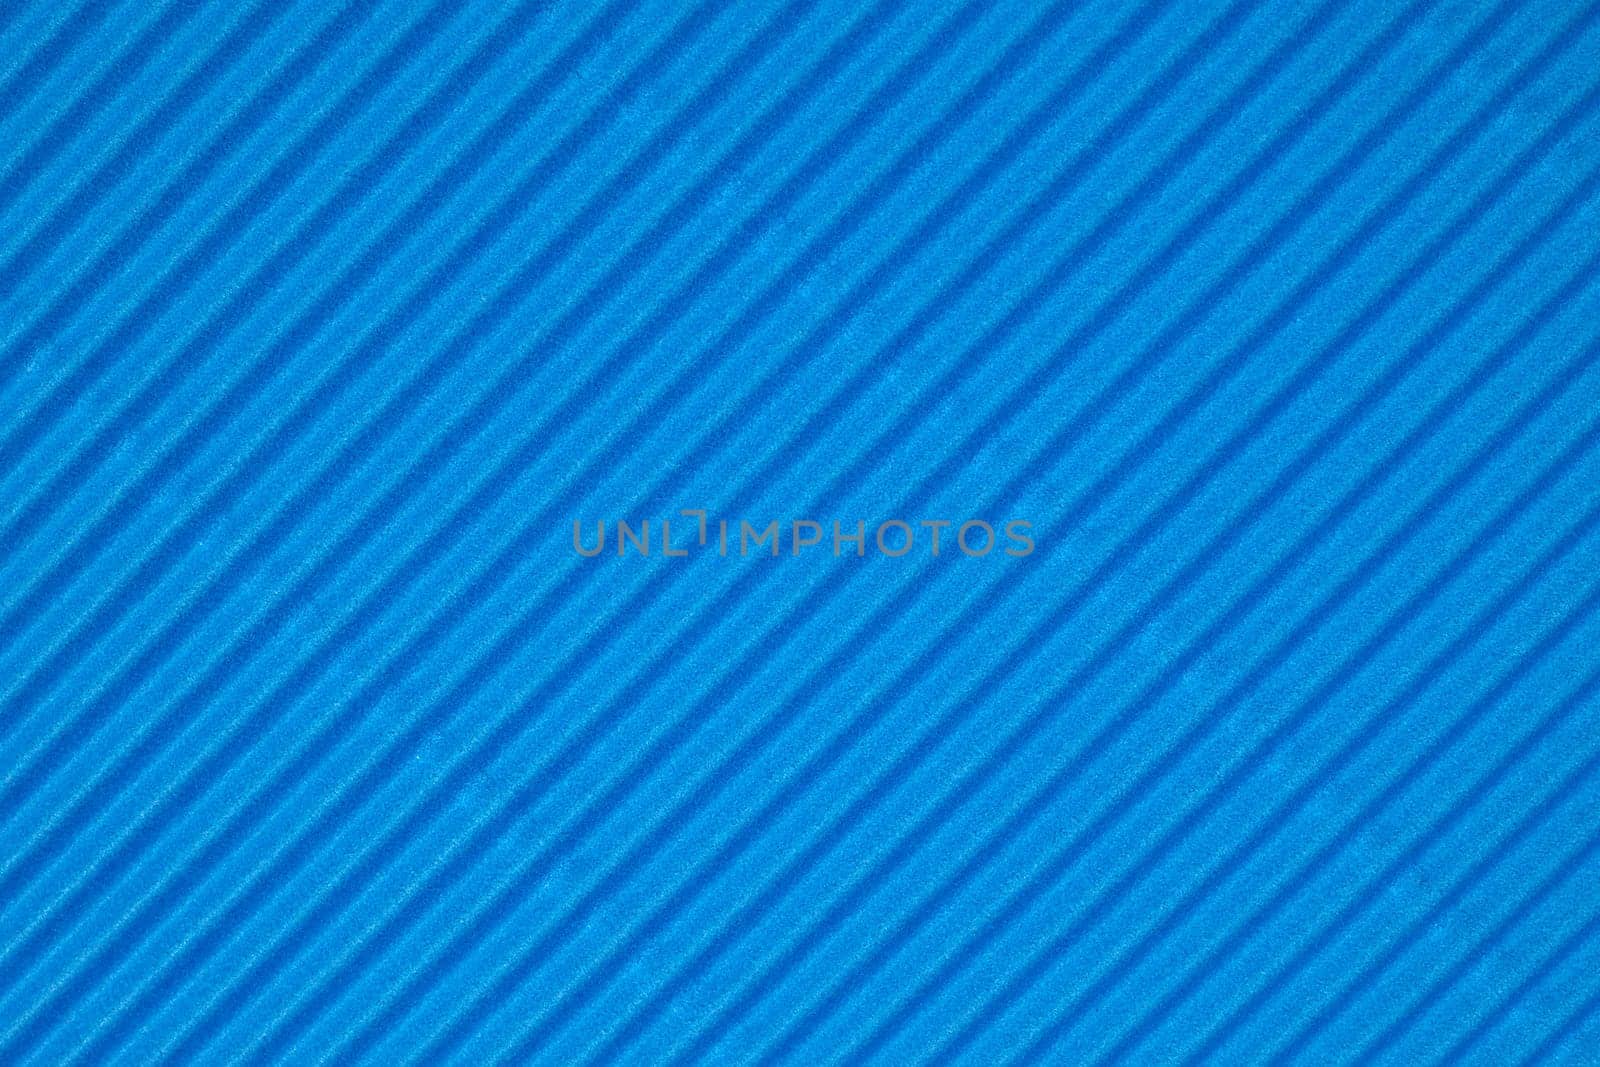 Blue diagonally ribbed cardboard. Meant as background